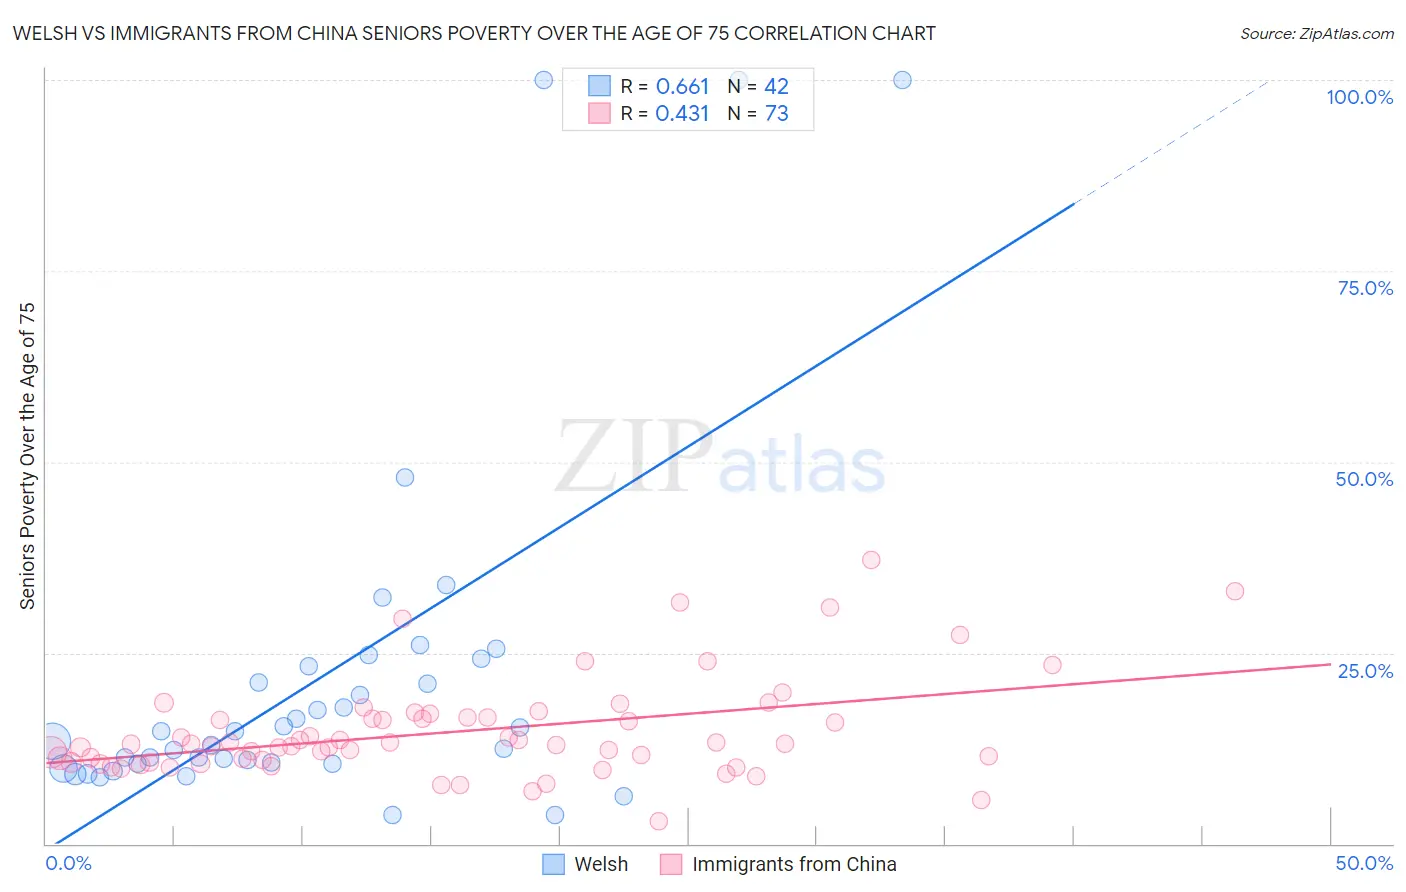 Welsh vs Immigrants from China Seniors Poverty Over the Age of 75